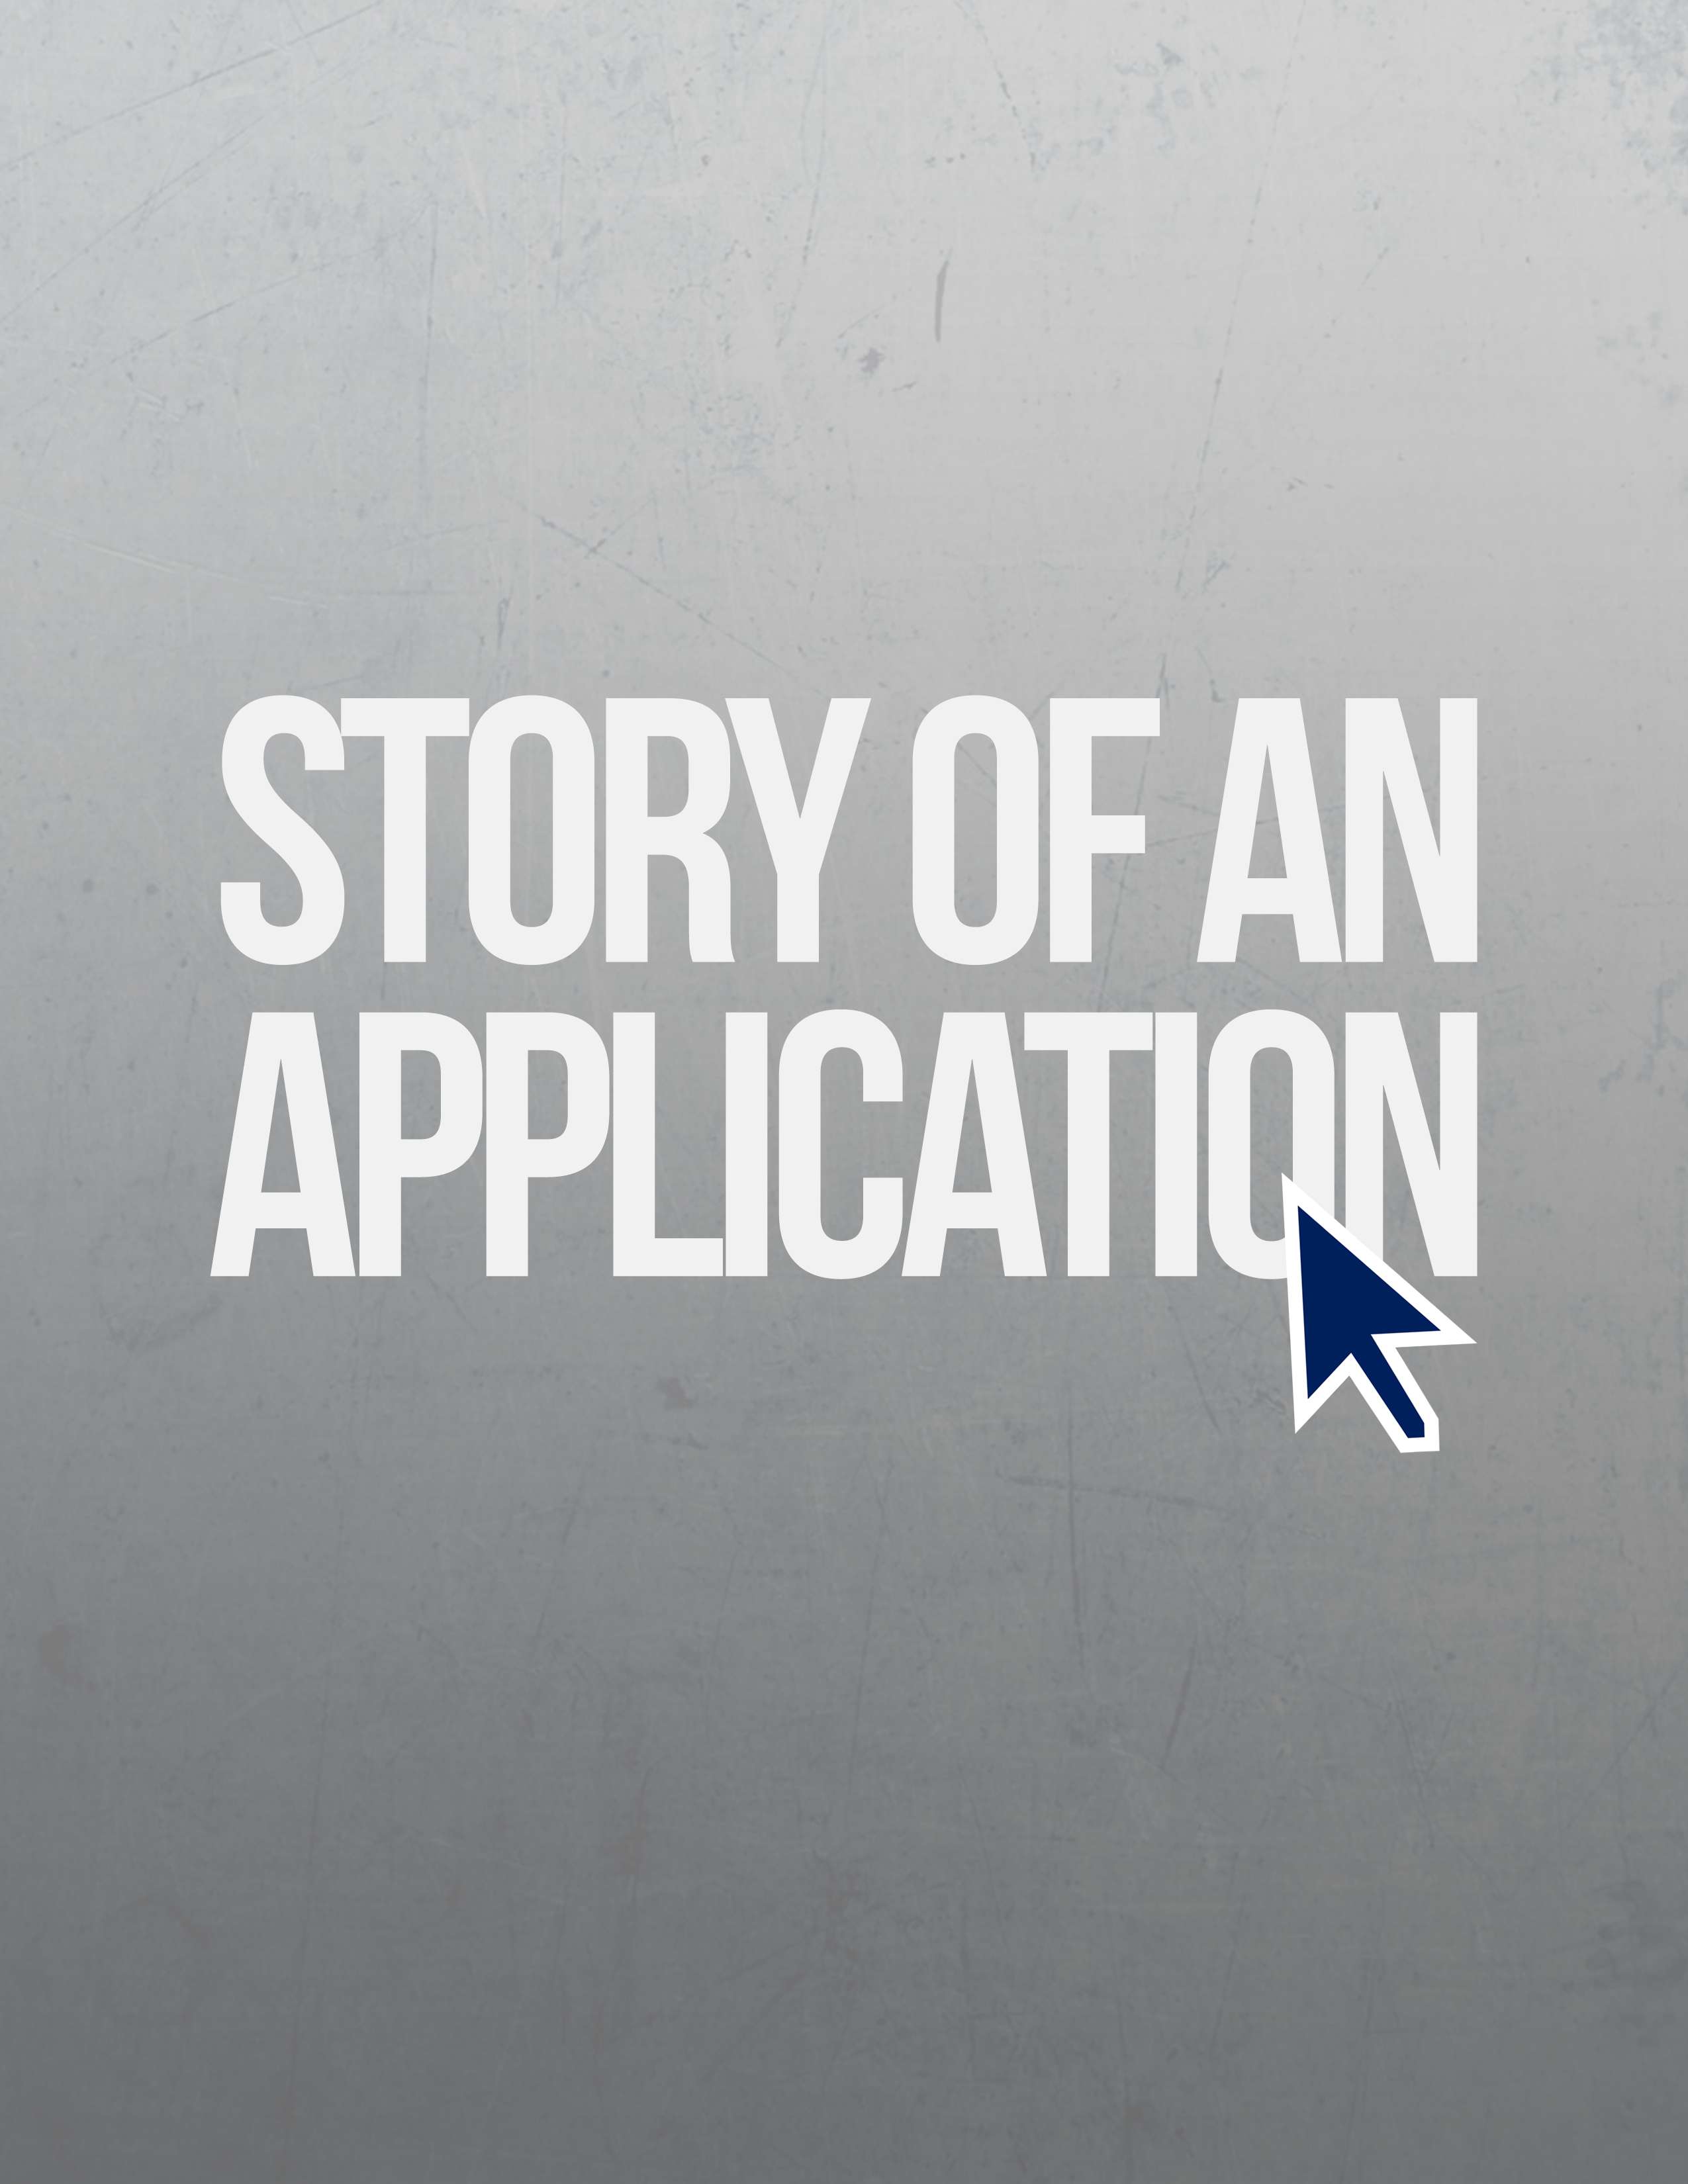 The Story of an Application